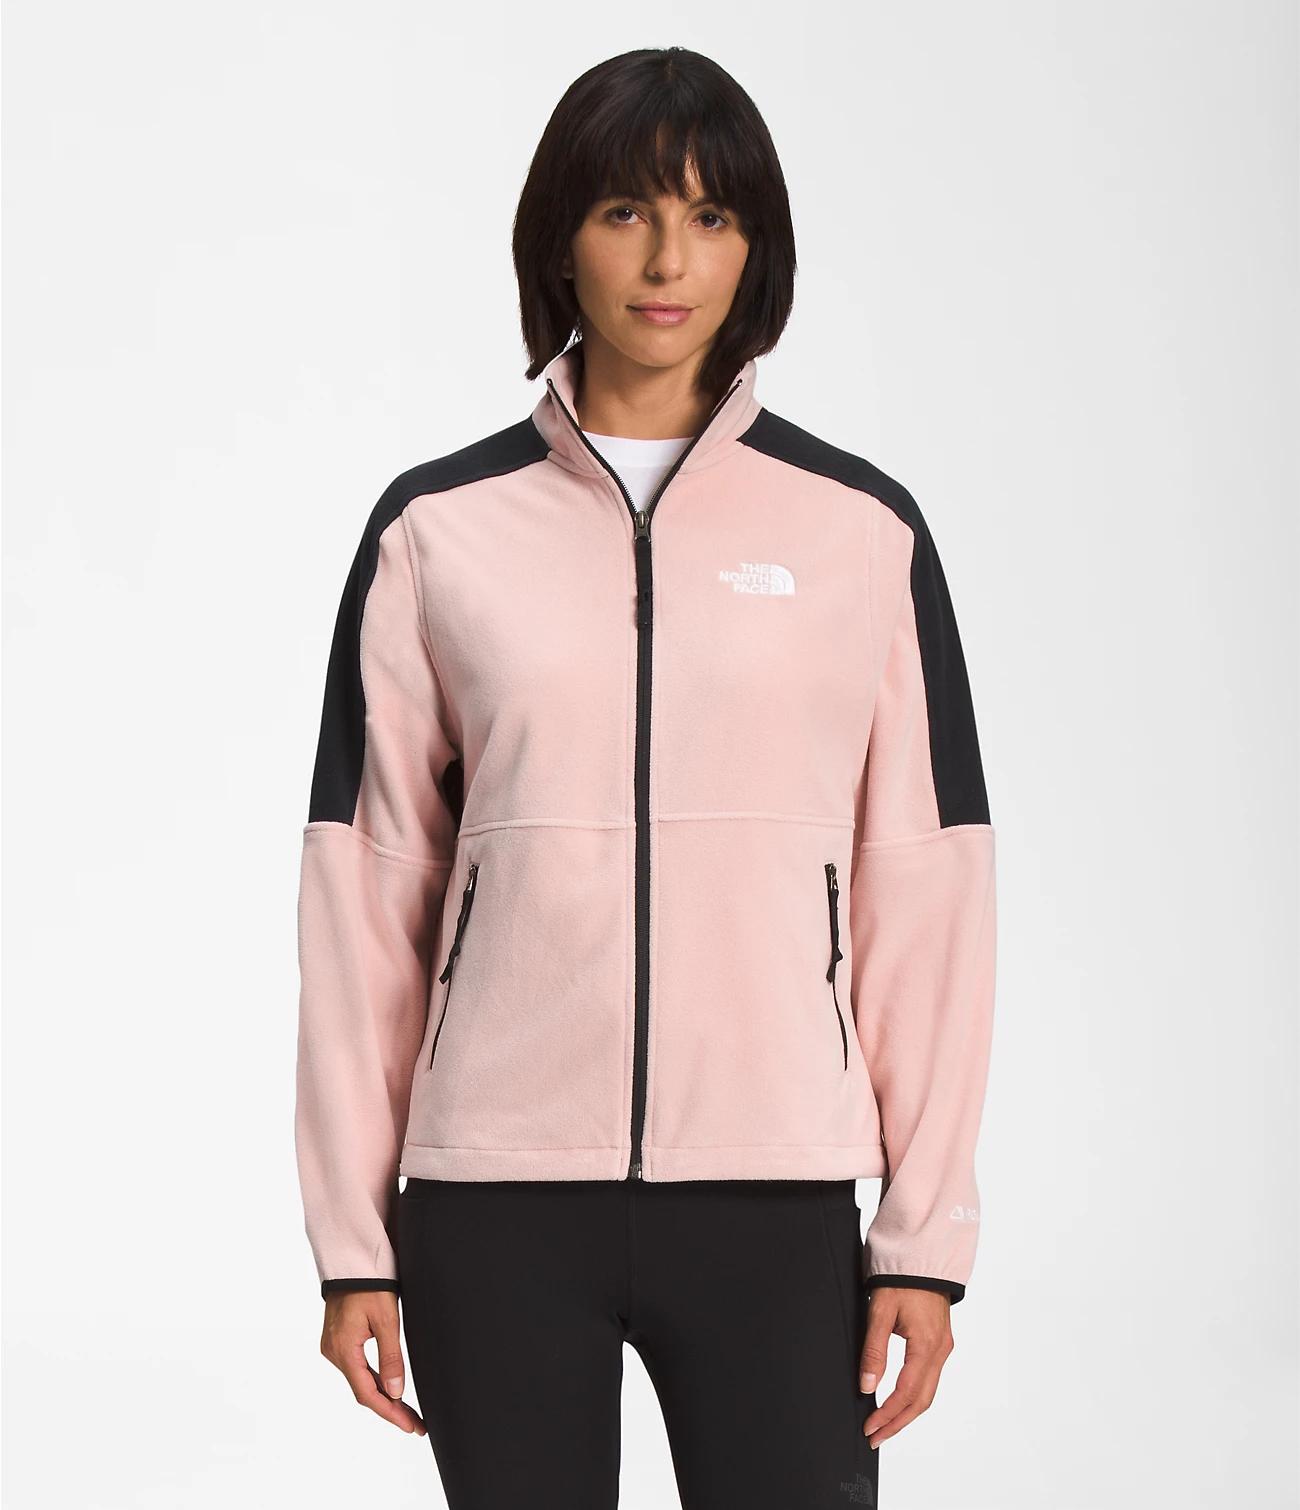 Women’s TNF™ Polartec® 100 Full-Zip by THE NORTH FACE | jellibeans